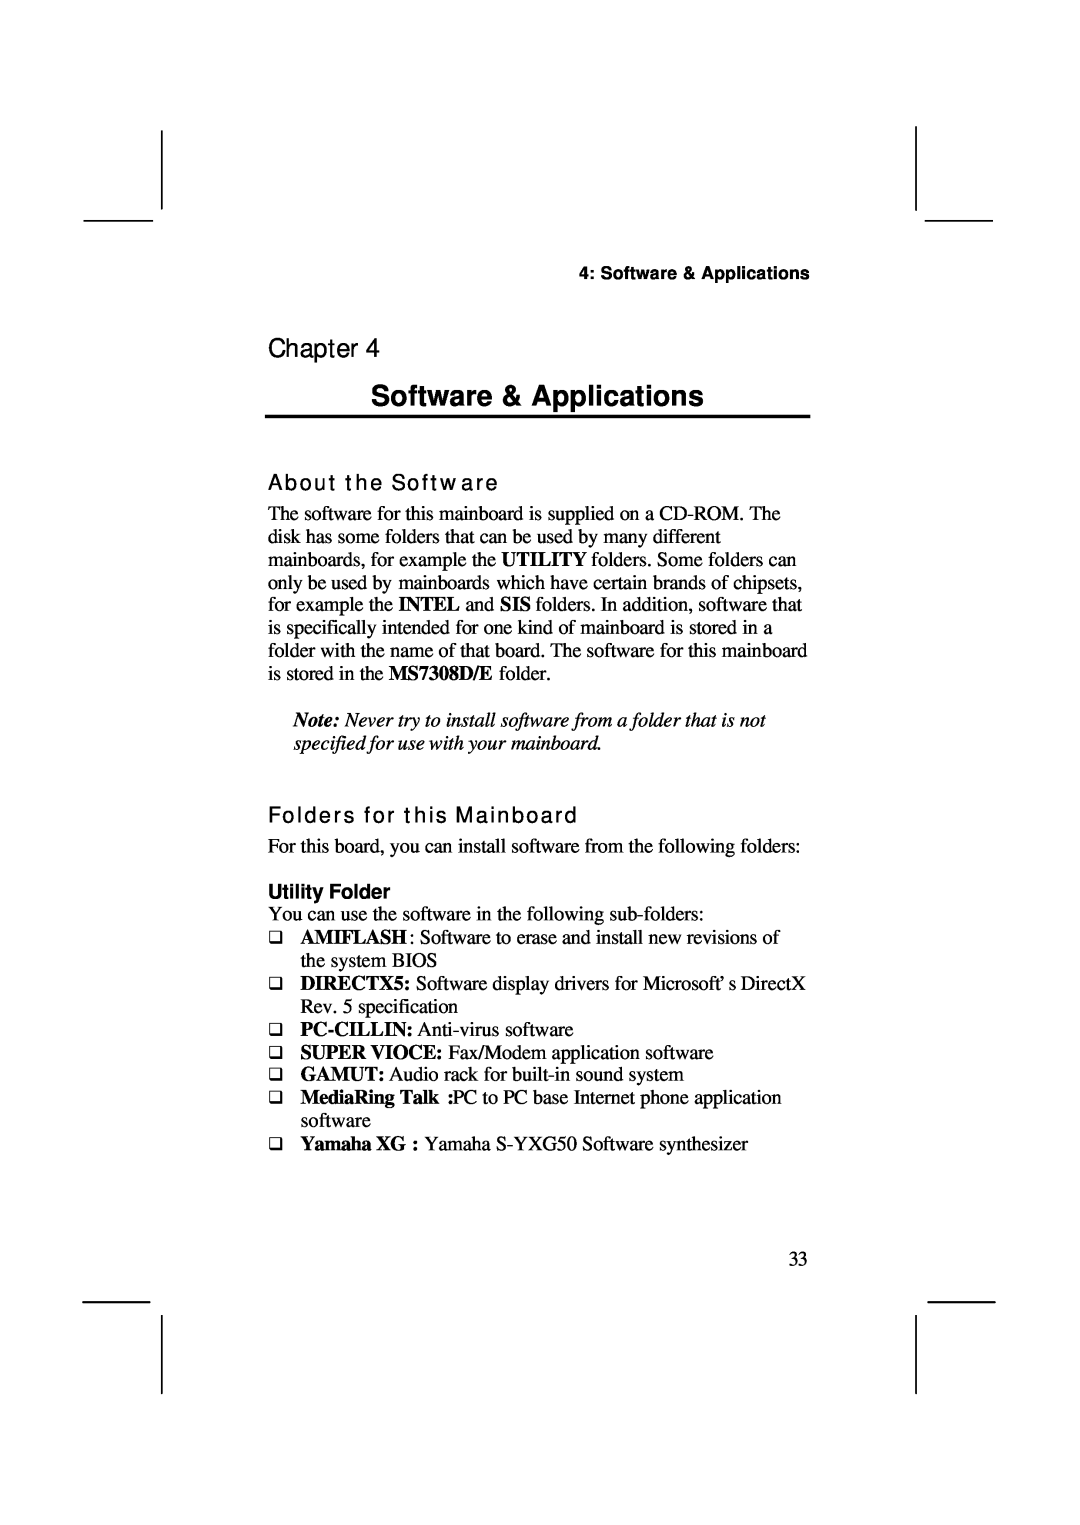 IBM MS7308D/E user manual Chapter Software & Applications, About the Software, Folders for this Mainboard, Utility Folder 